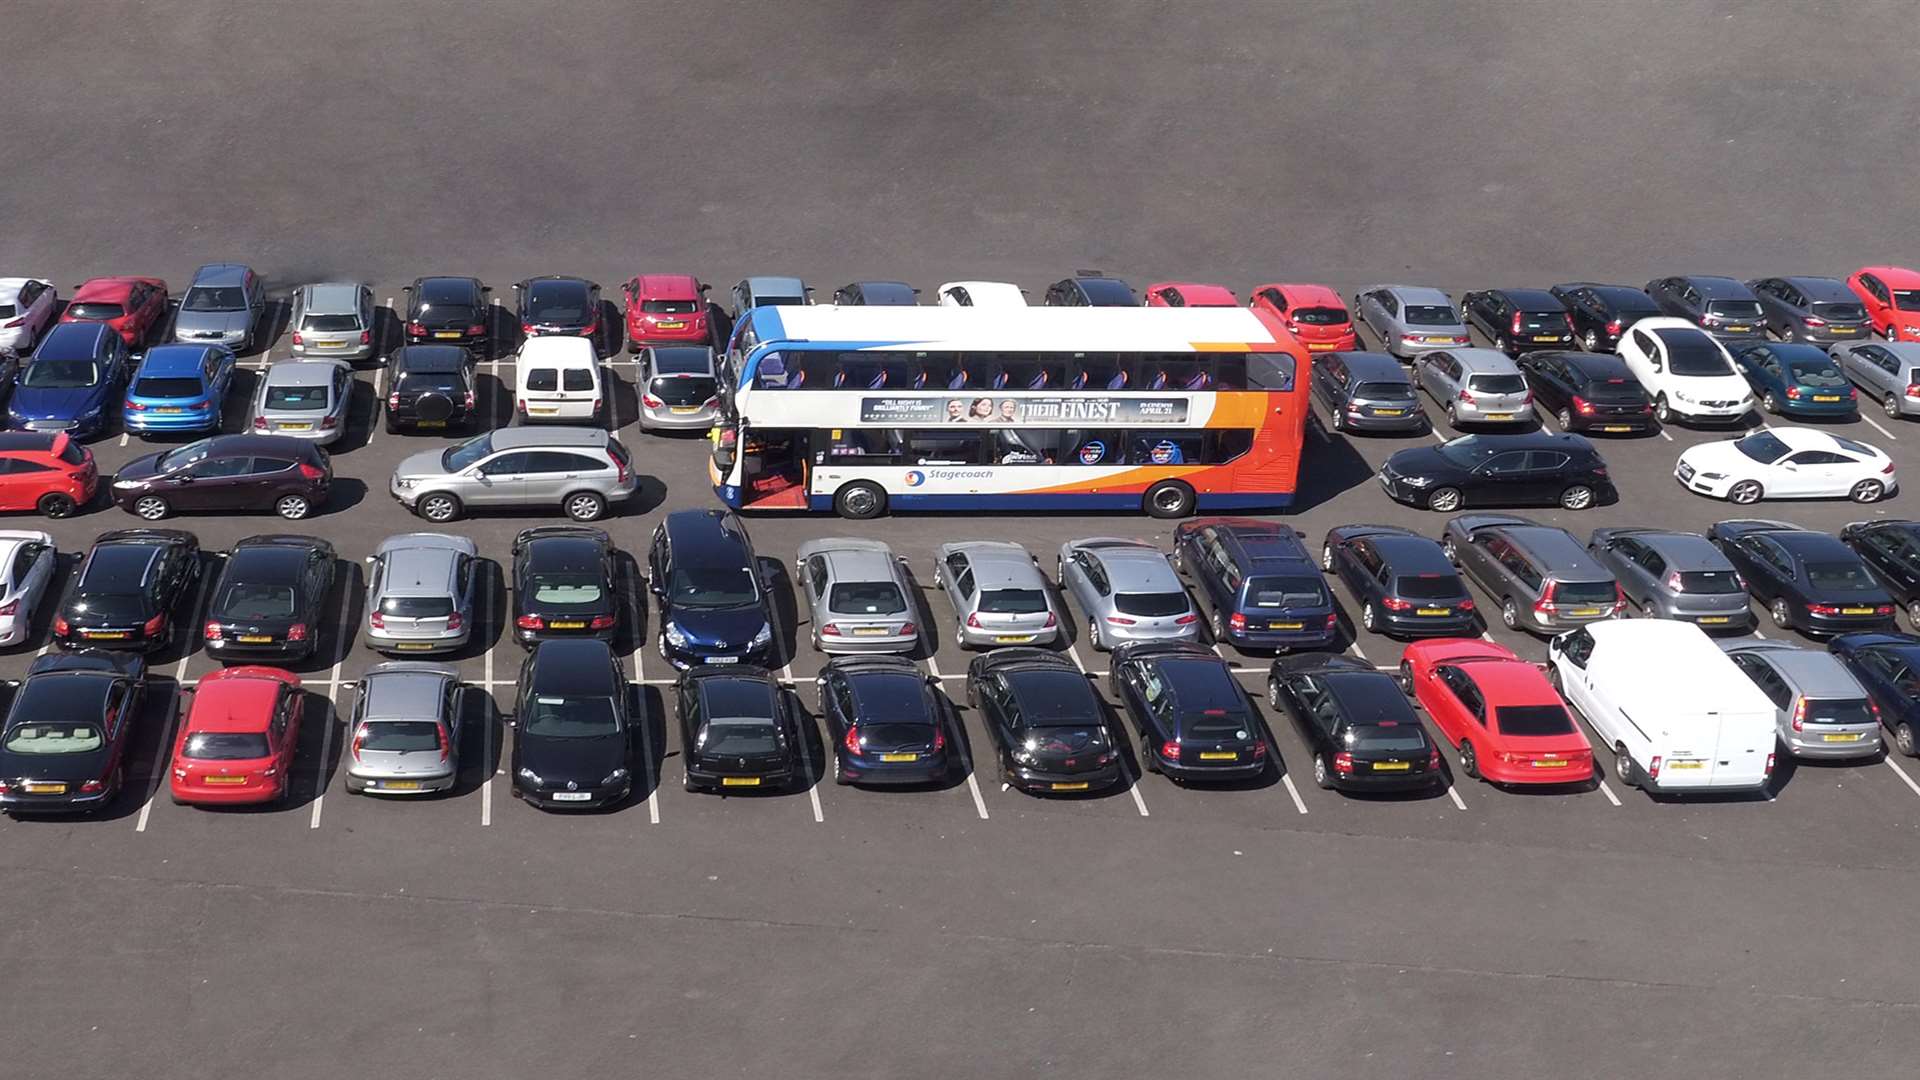 One double decker could take 75 cars off the road, says Stagecoach. Picture courtesy of Stagecoach